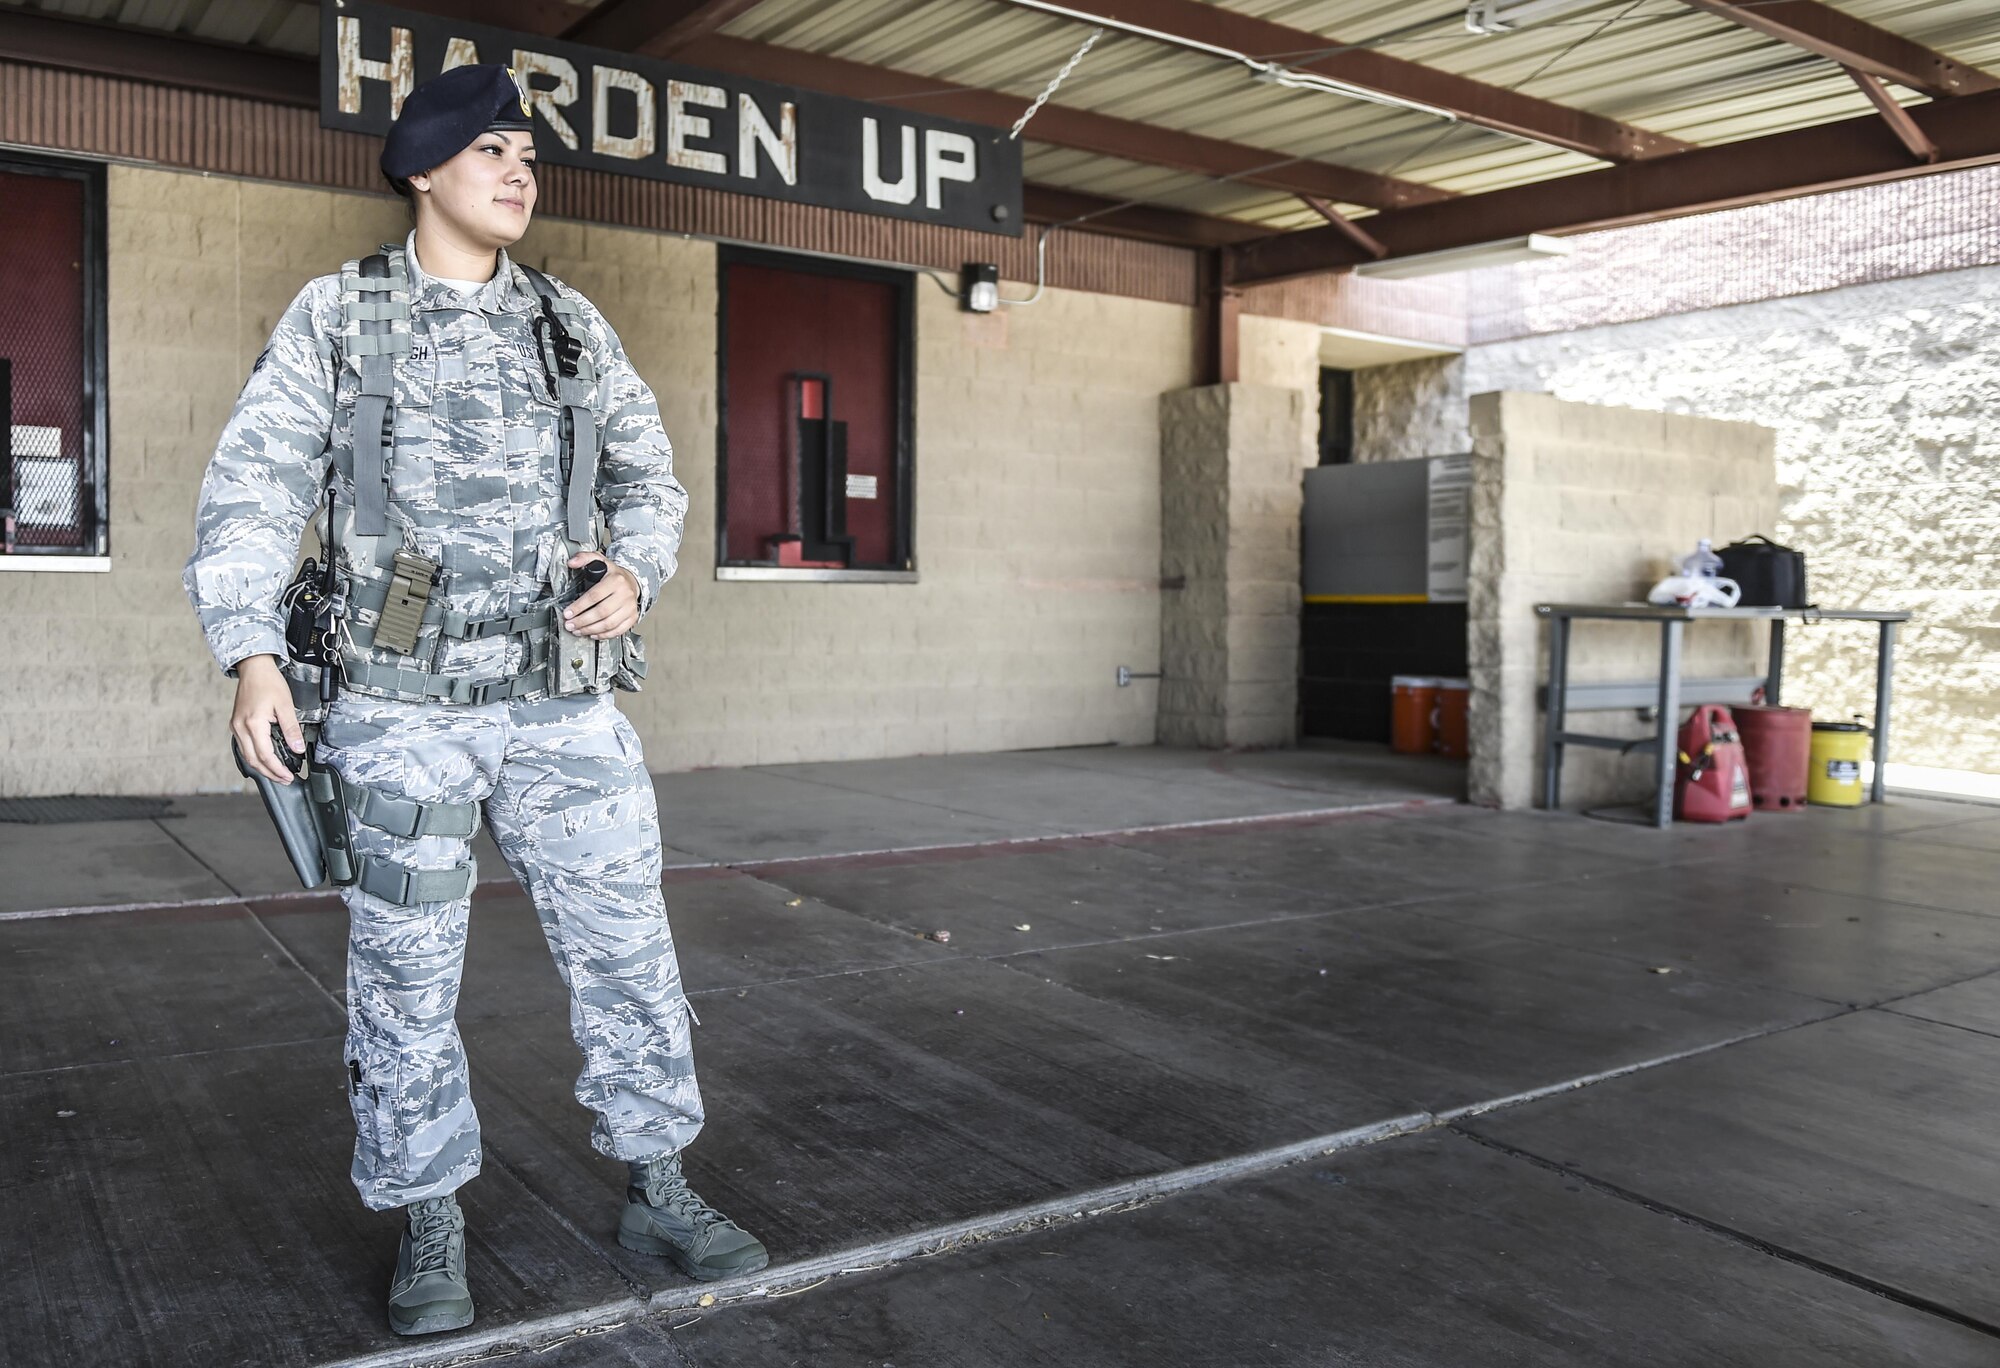 Senior Airman Alexandra Haytasingh, 49th Security Forces Squadron, finishes her shift during National Police Week at Holloman Air Force Base, N.M. on May 15, 2017. National Police Week was established in 1962 by President John F. Kennedy to pay tribute to law enforcement officers who lost their lives in the line of duty for the safety and protection of others, according to the National Peace Officer's Memorial Fund website. Ceremonies are held annually in Washington D.C., as well as in communities across the nation. (U.S. Air Force photo by Staff Sgt. Stacy Jonsgaard)    